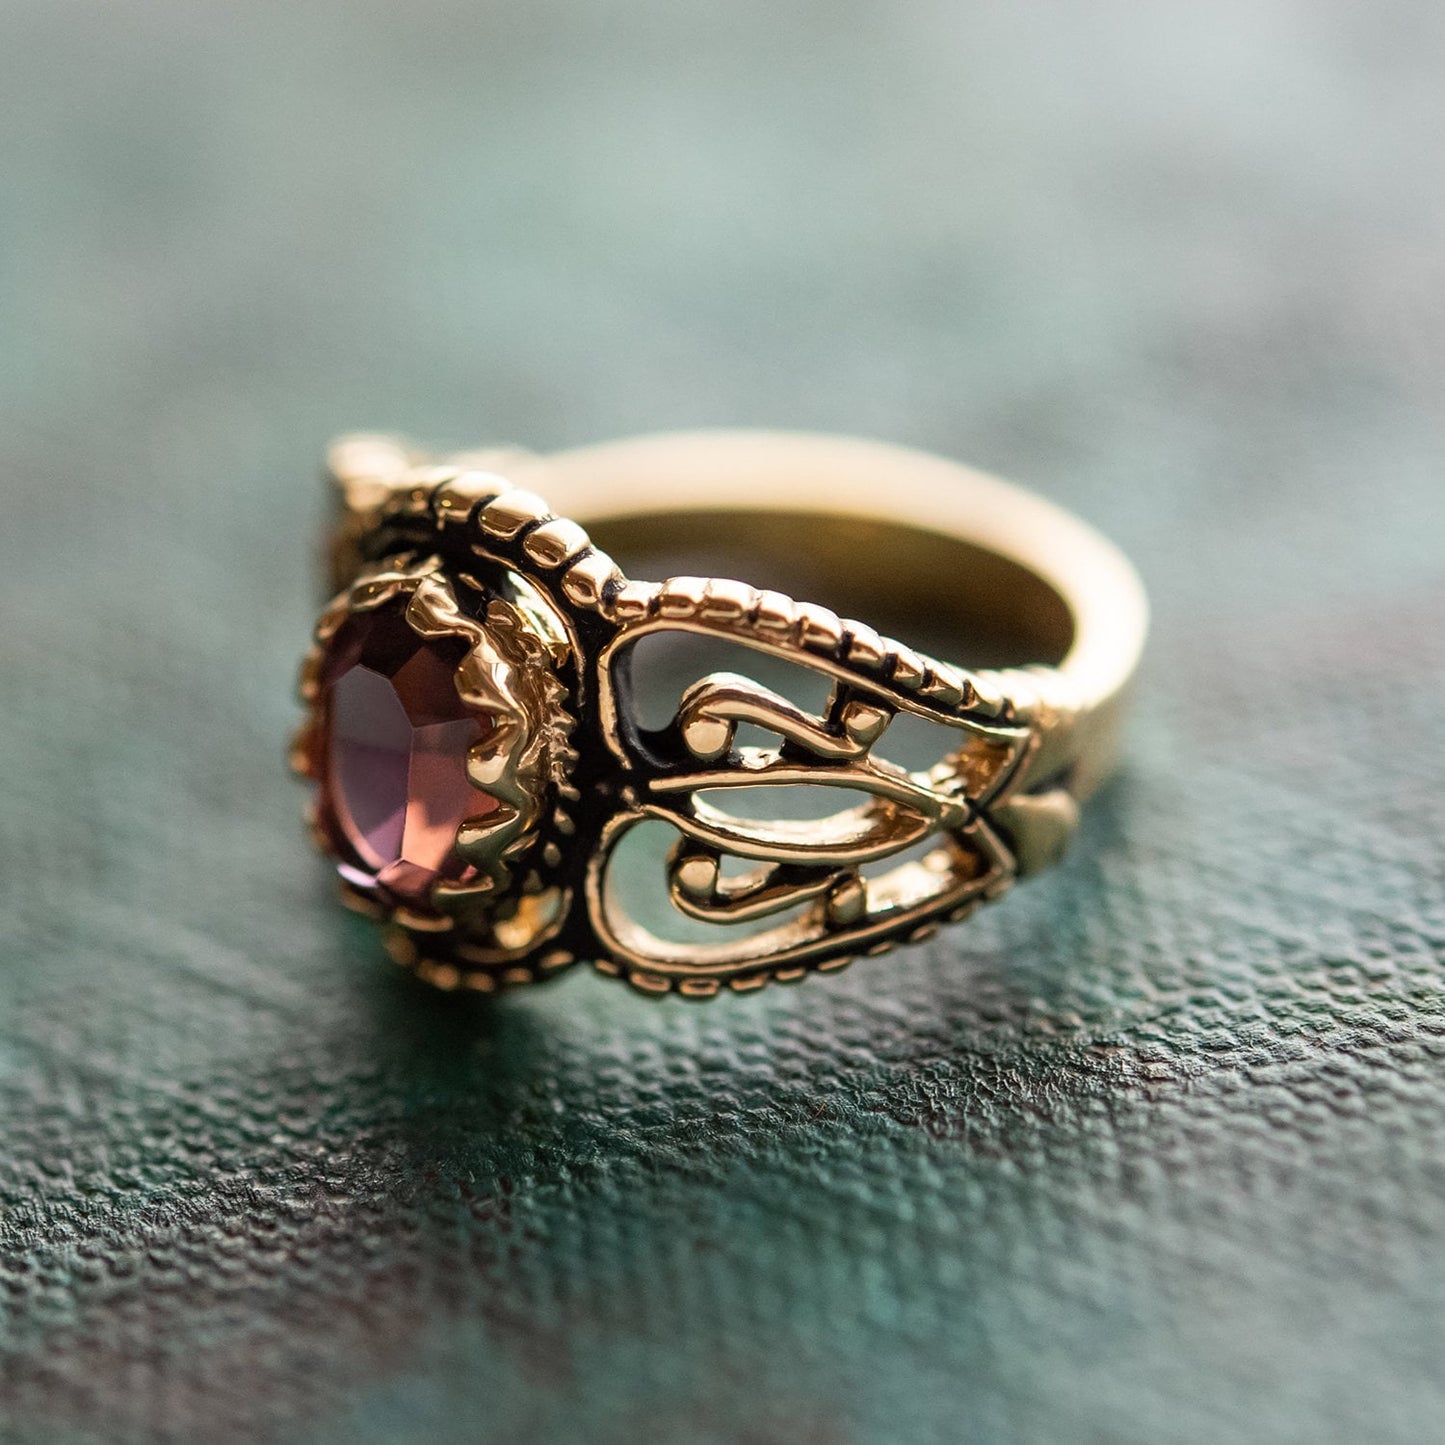 Vintage Ring Amethyst Crystal Ring Antique 18k Gold Womans Jewelry Rings Handmade Size R142-AAY - Limited Stock - Never Worn